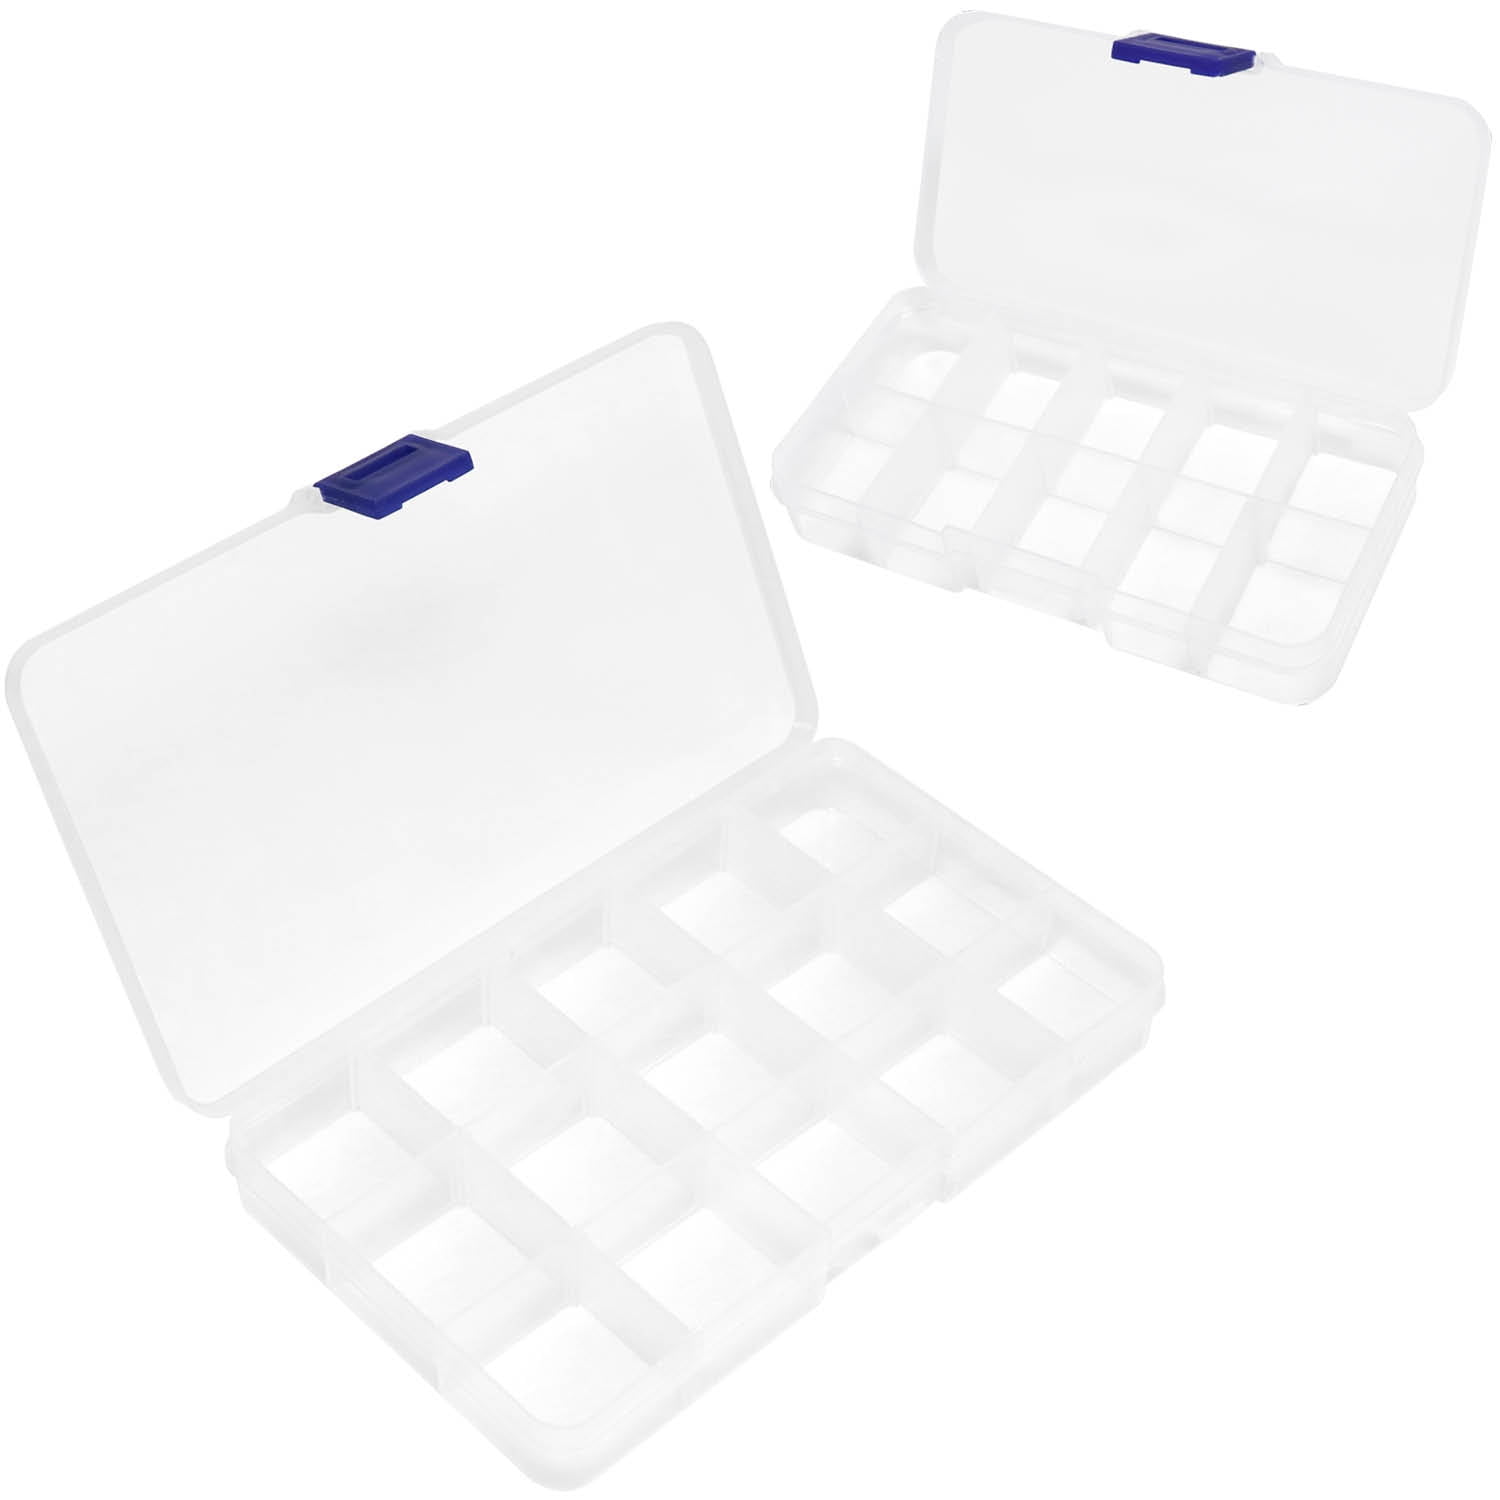 Large Plastic Sorting Tray for Diamonds Beads ,in Two Colors